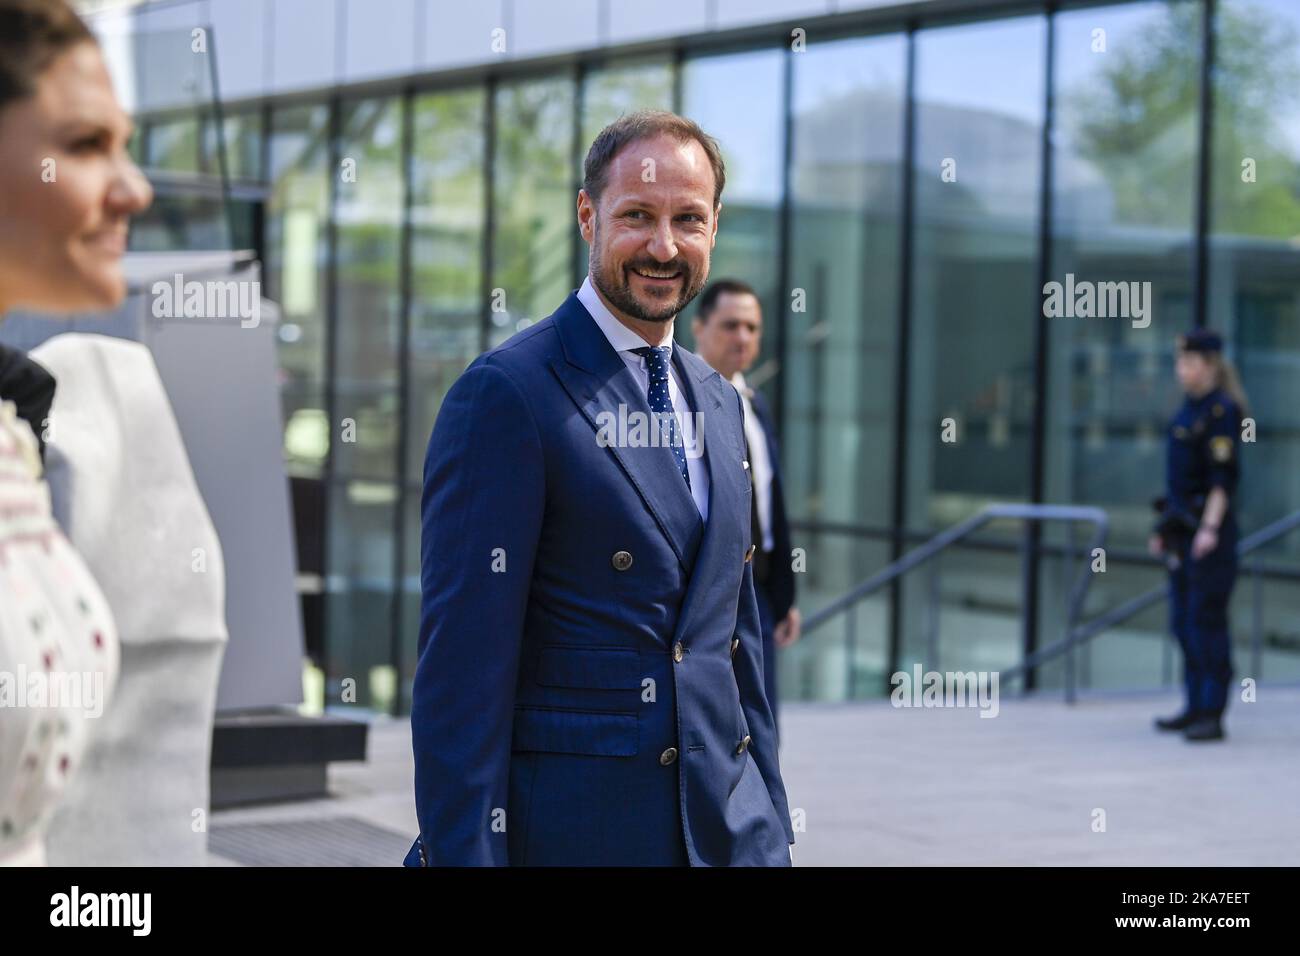 Stockholm, Sweden 20220502. Crown Prince Haakon at Karolinska Institutet in Solna. The Norwegian Crown Prince and Crown Princess will visit Sweden for three days. Photo: Annika Byrde / NTB  Stock Photo